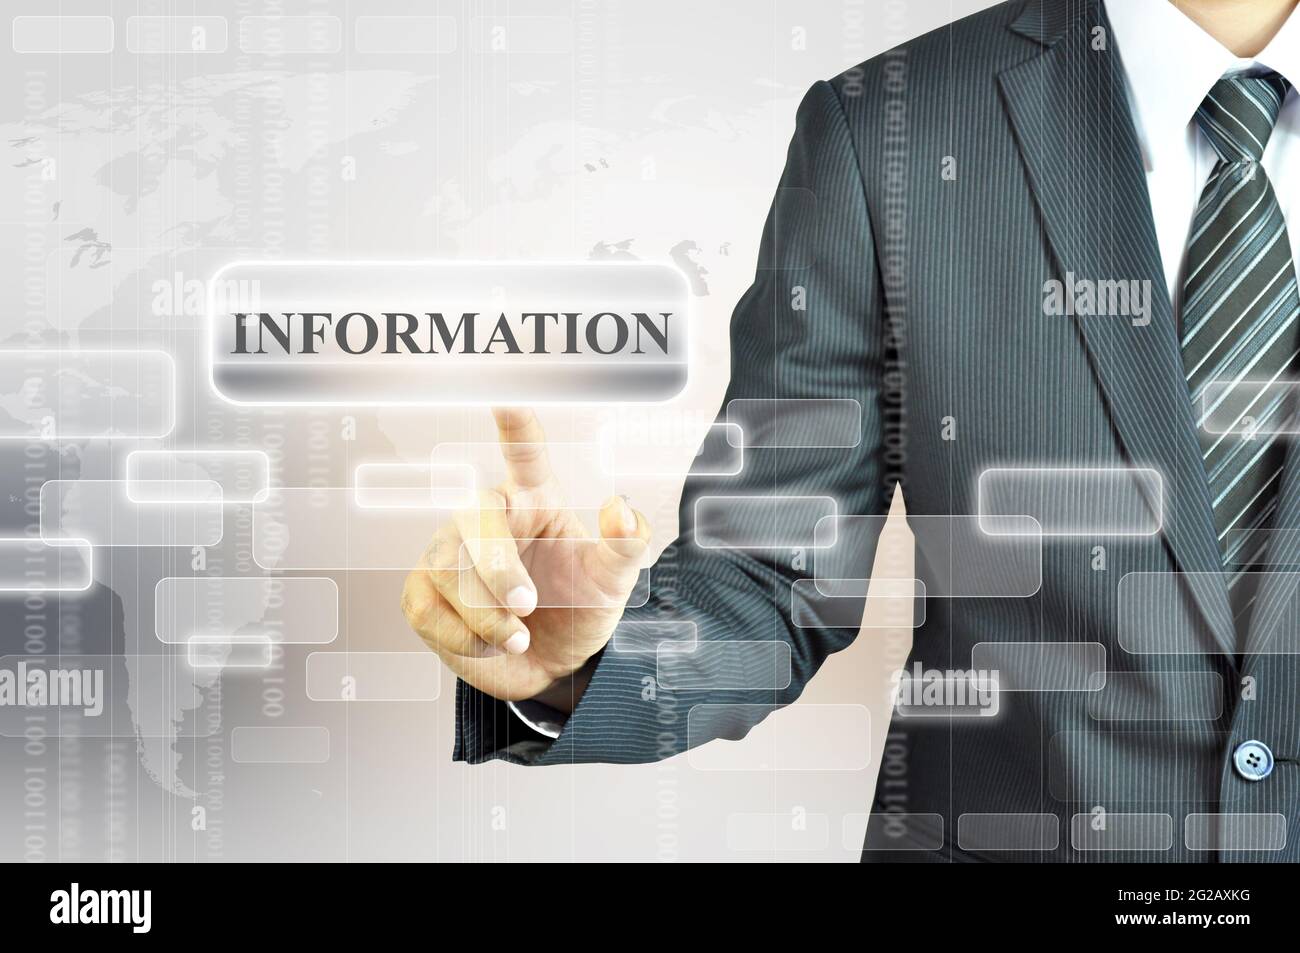 business information Stock Photo